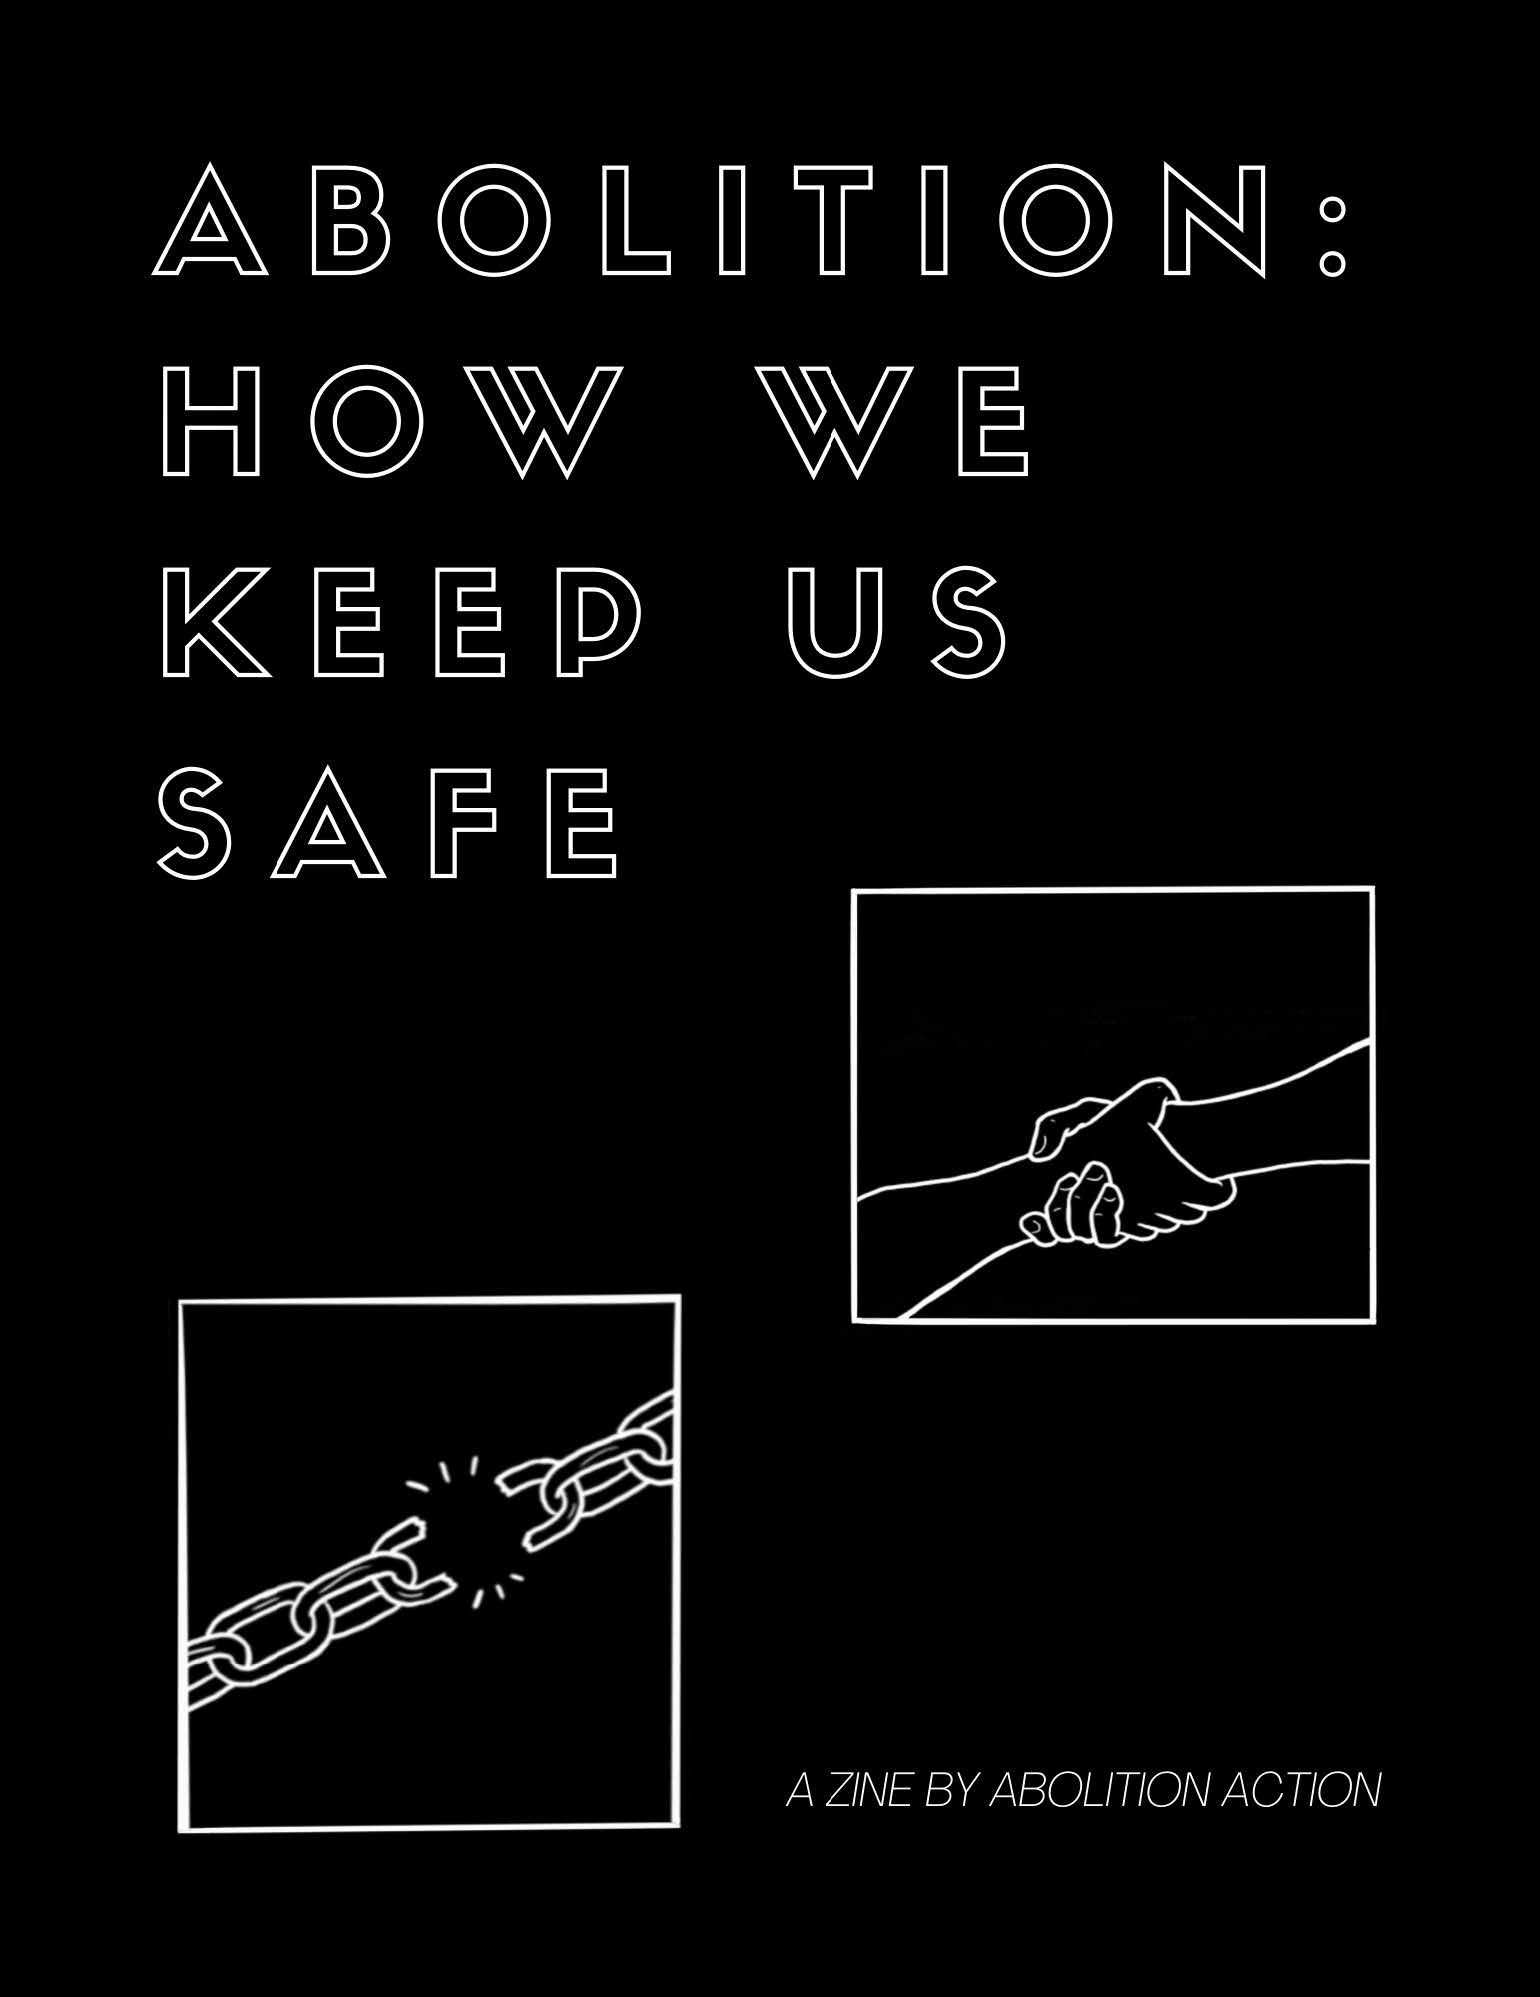 zine cover: white type on black background. graphics of breaking chain and arms holding each other by the wrist